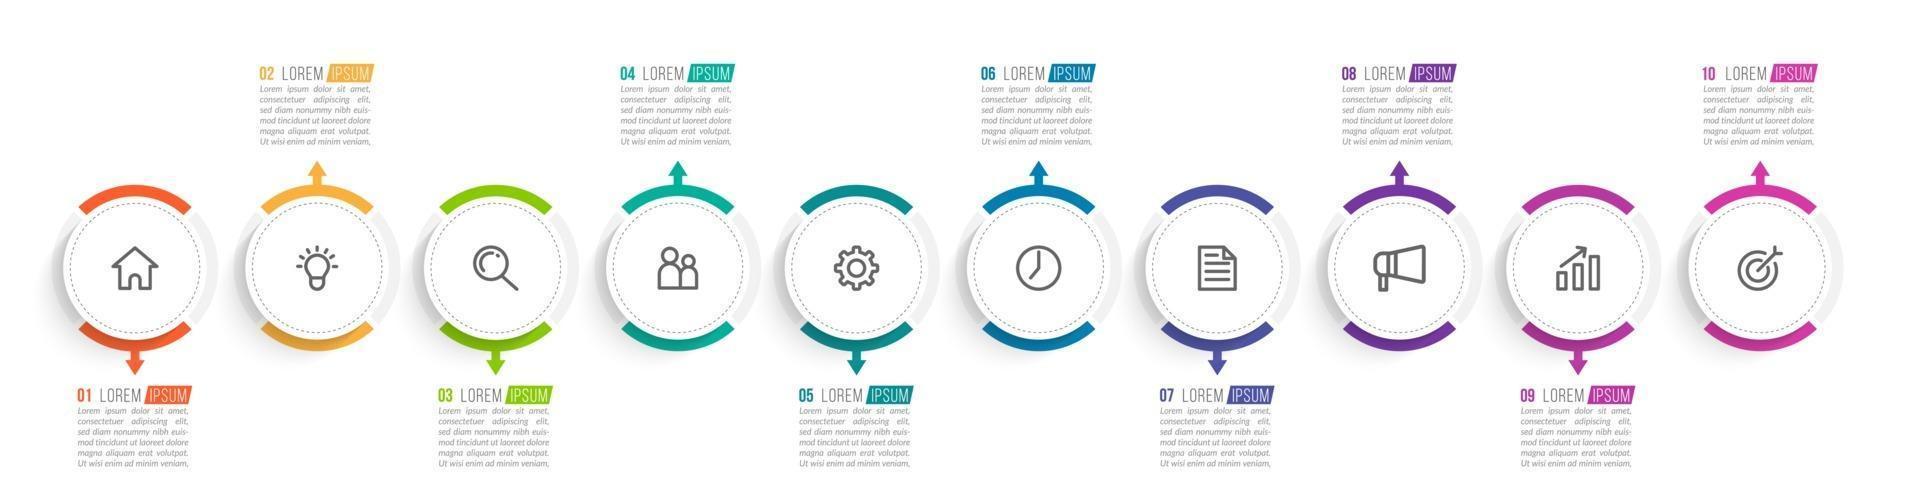 10 Steps Infographic for Business Presentation vector